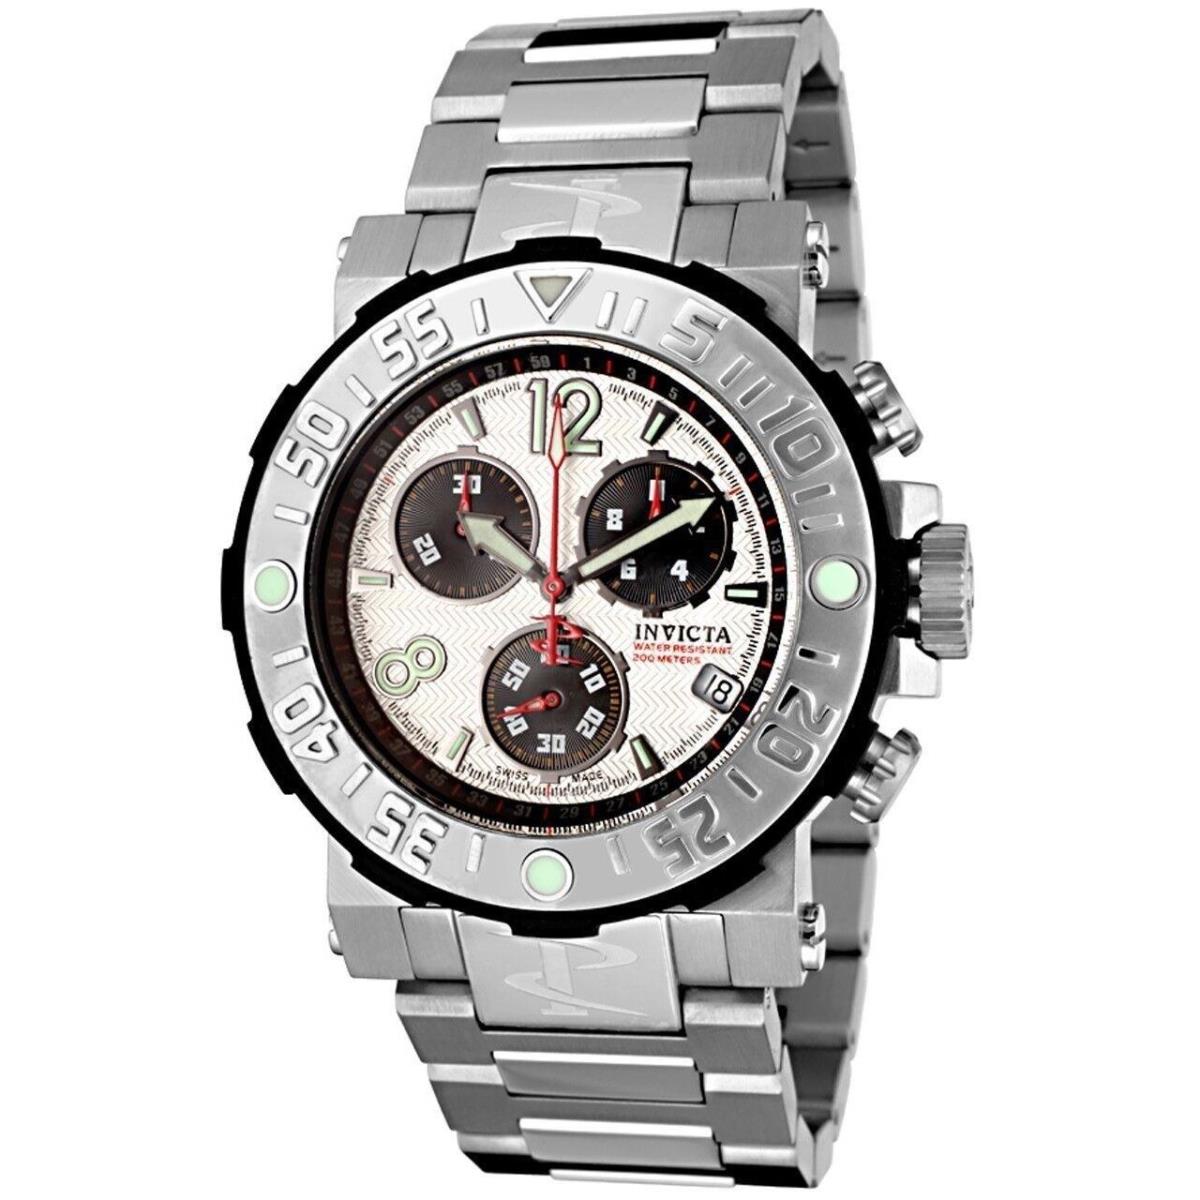 Swiss Made Invicta 6129 Reserve Sea Rover Chronograph Mens Watch with 3-Slot Box - Dial: Silver, Band: Silver